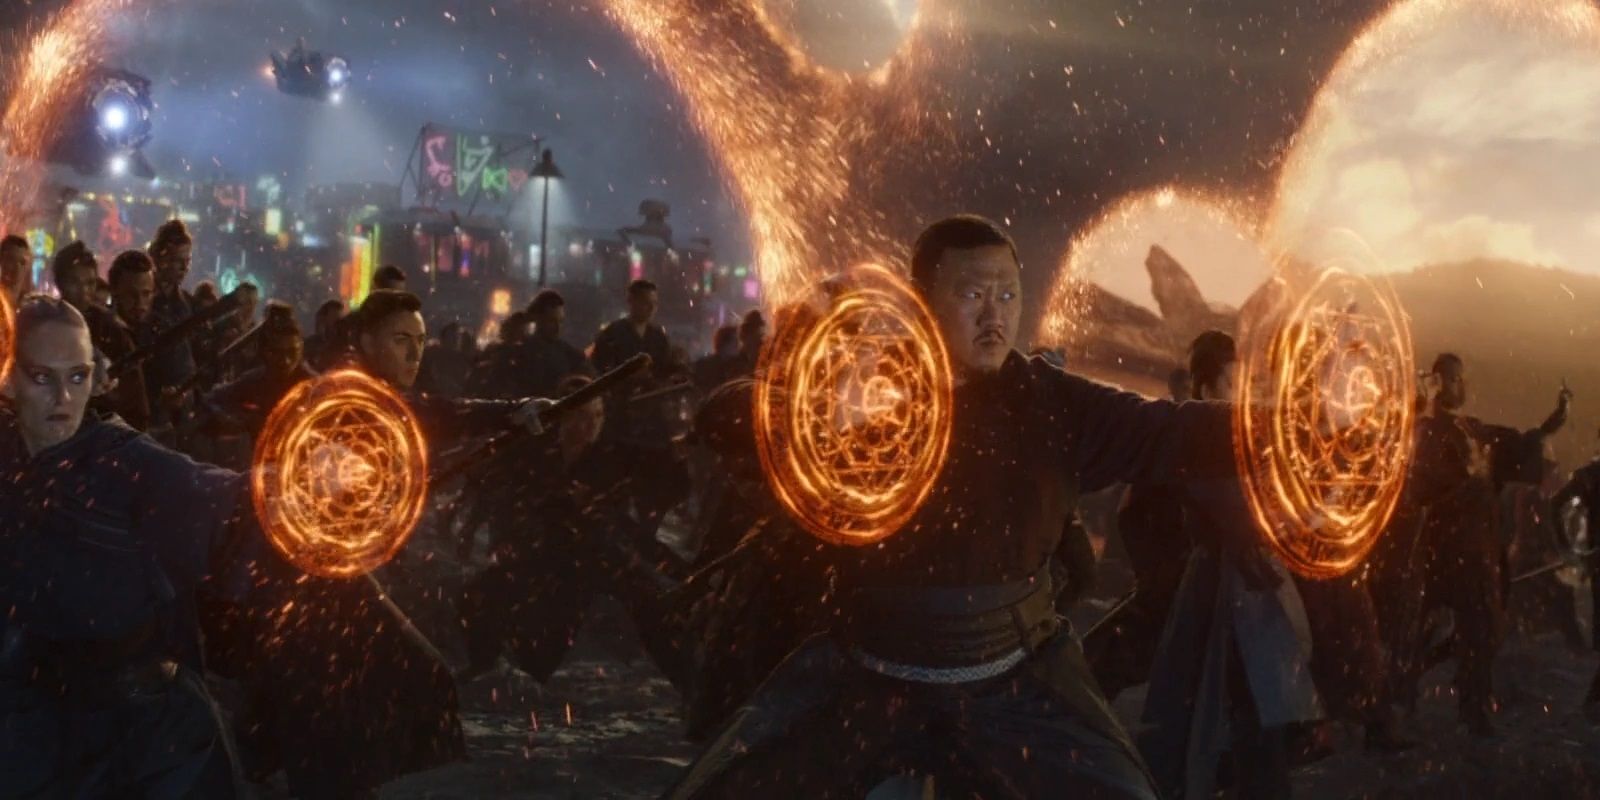 Masters of the Mystic Arts in Endgame